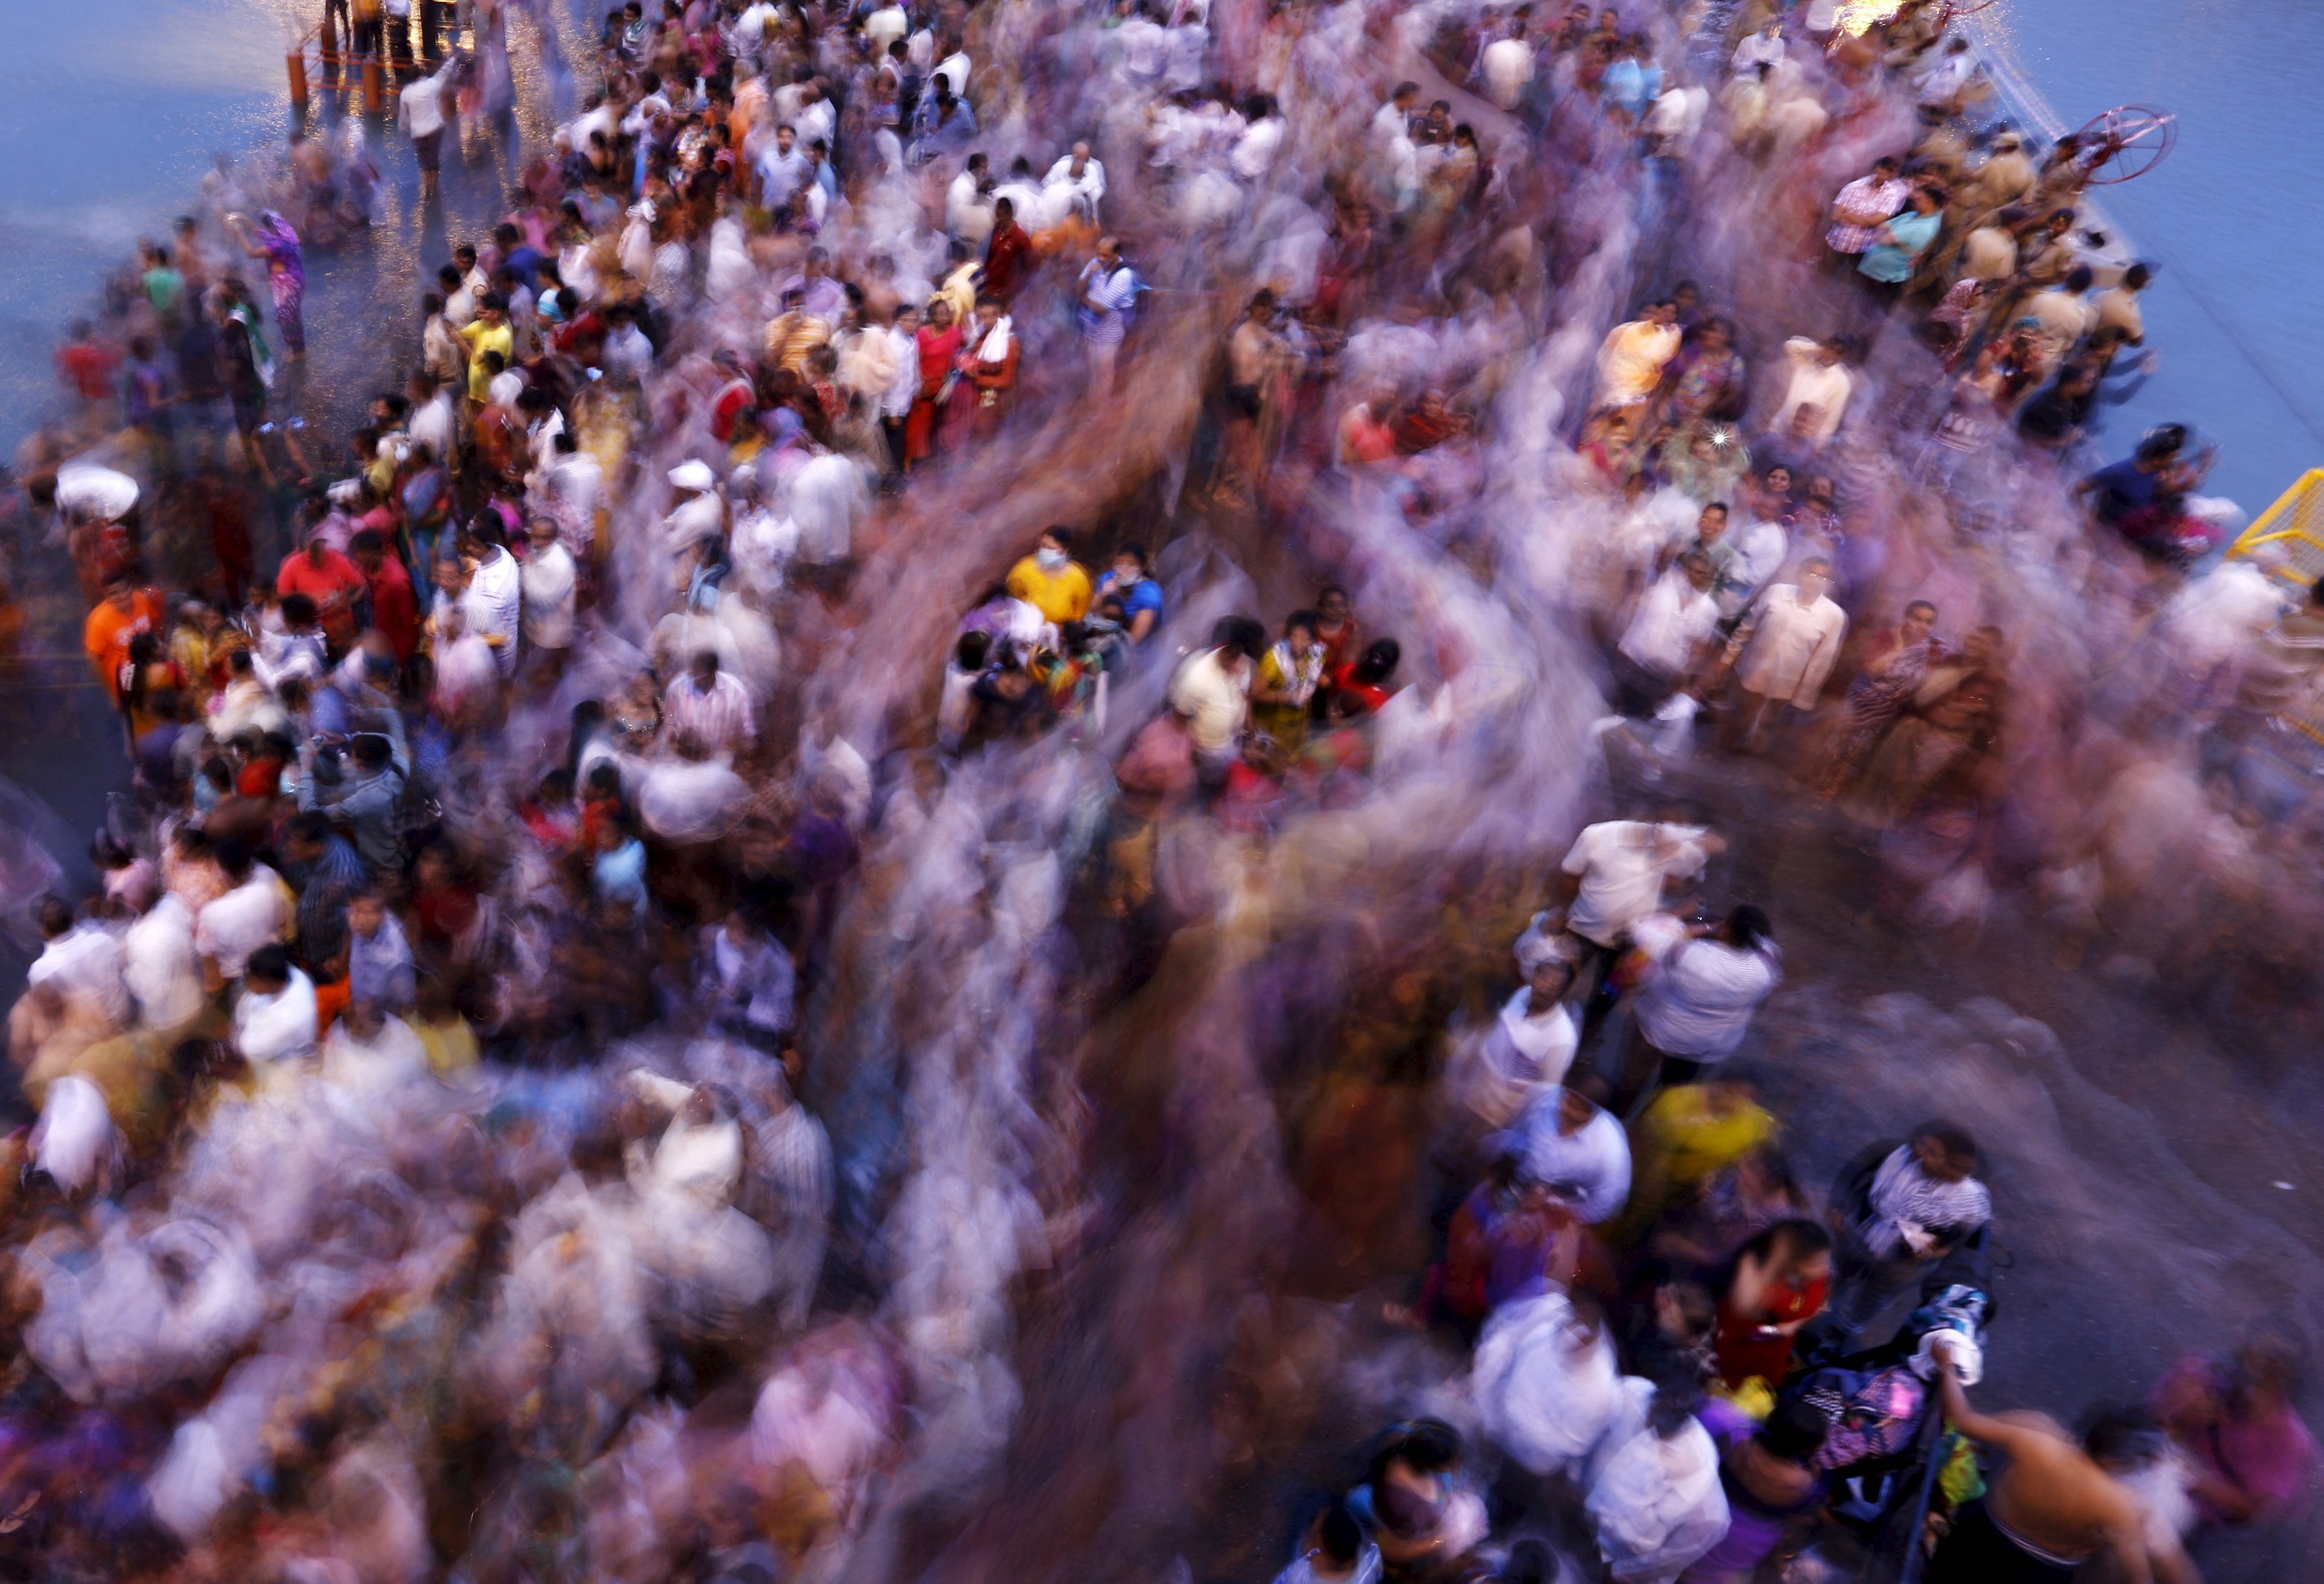 Devotees attend the second  Shahi Snan  (grand bath) on the banks of the Godavari river at the Kumbh Mela or Pitcher Festival in Nashik, India, on Sept.13, 2015.